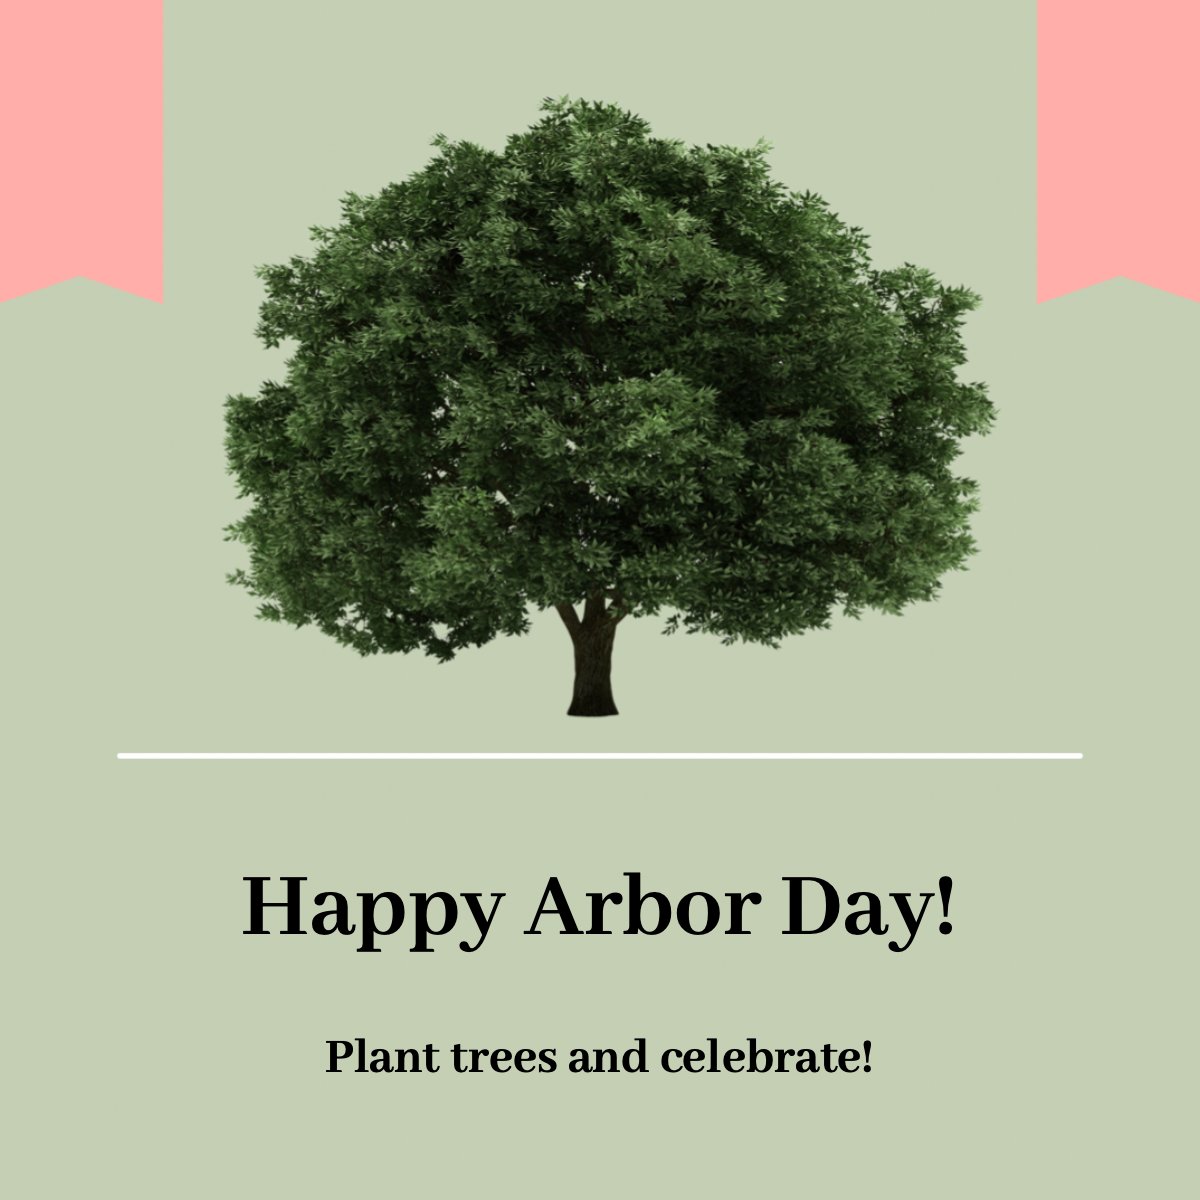 'There's nothing wrong with having a tree as a friend.' – Bob Ross

Happy Arbor Day 🌲!

#arborday #trees #dayforthetrees #blue #white #black #sunset
 #AmericasMortgageSolutions #christianpenner #onestopbrokershop #mortgagebrokerwestpalmbeach #epicrealeststedeals